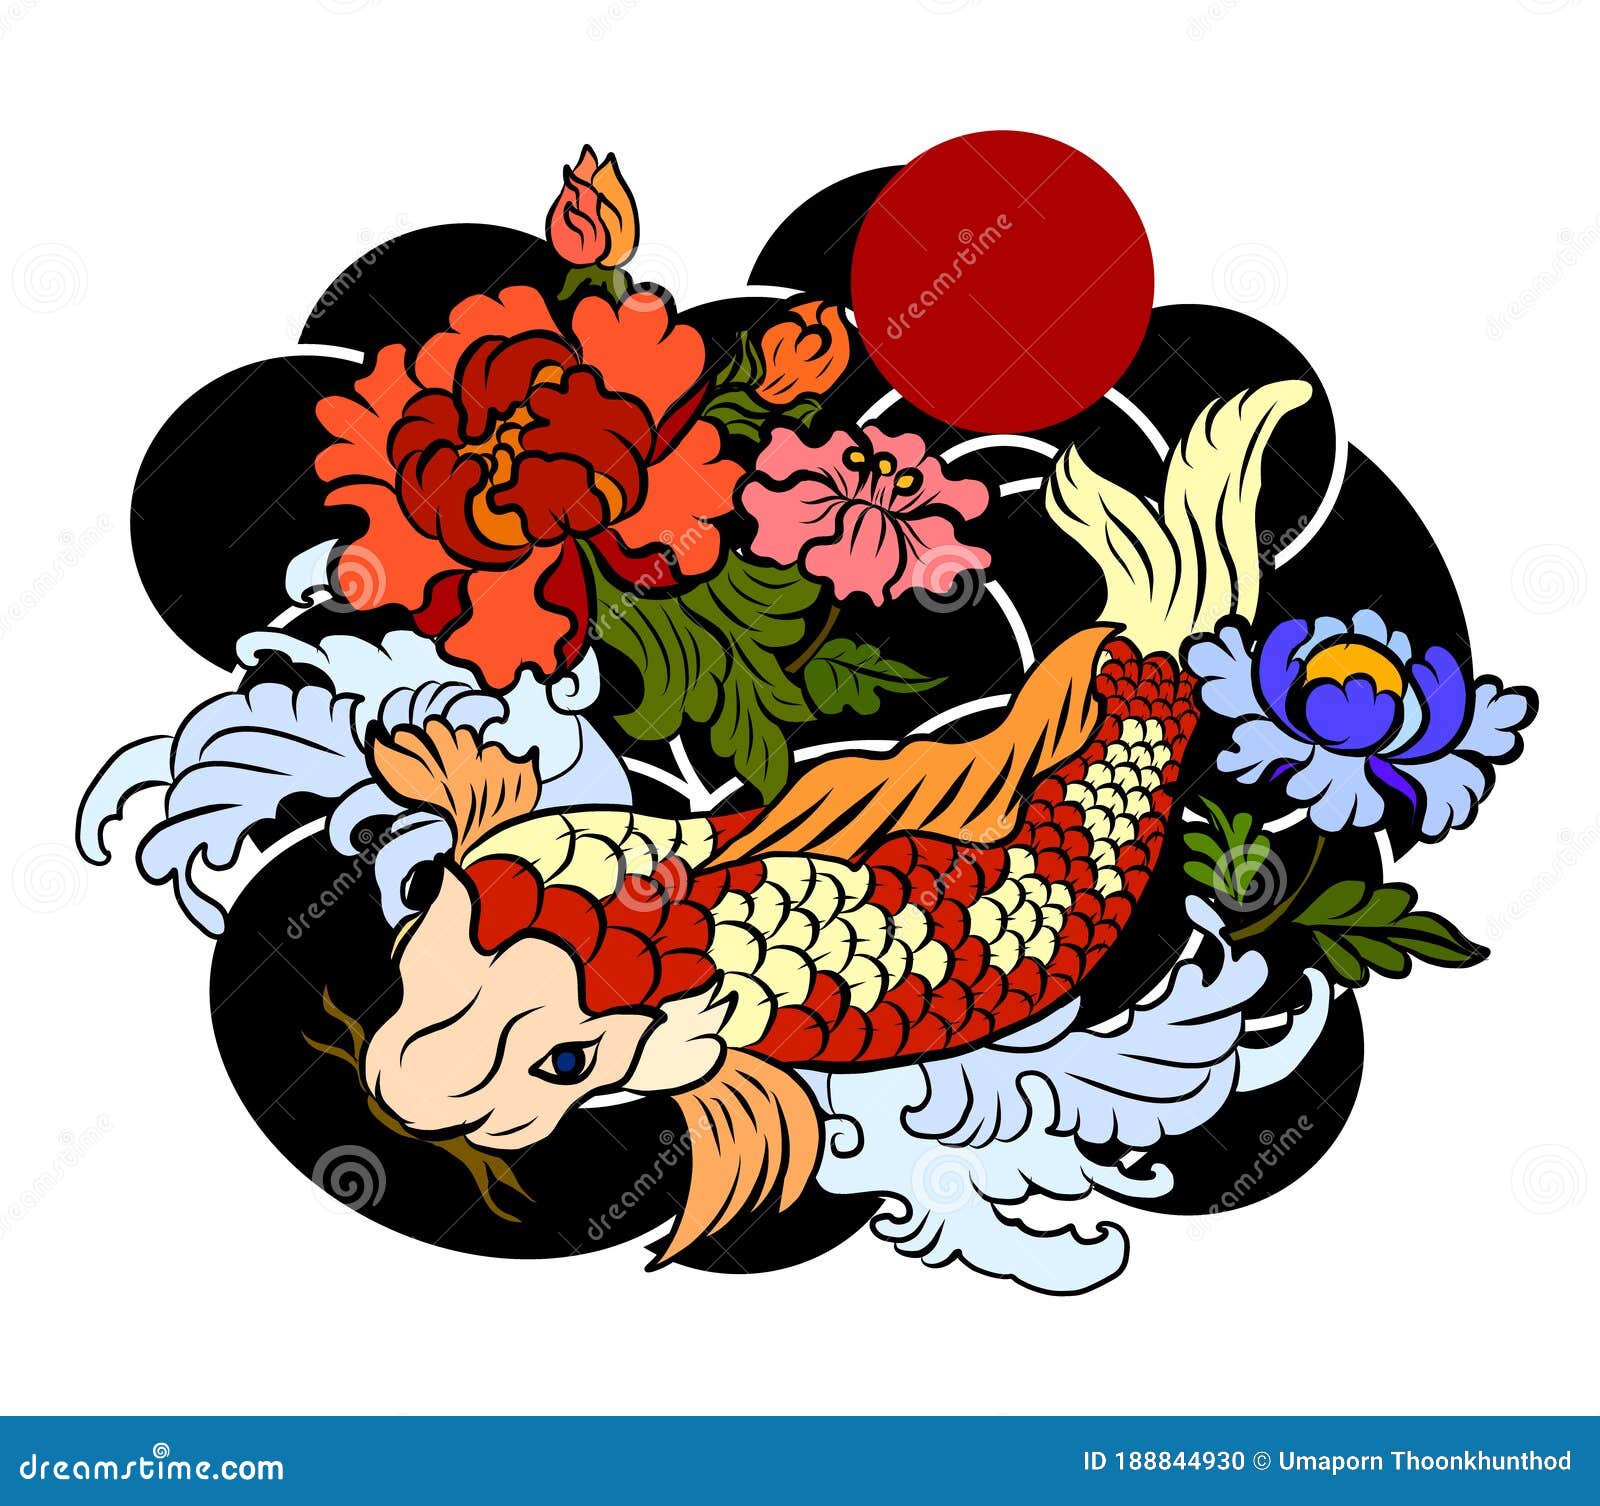 Hand Drawn Outline Koi Fish and Chinese Doodle Art. Peony,Cherry ...